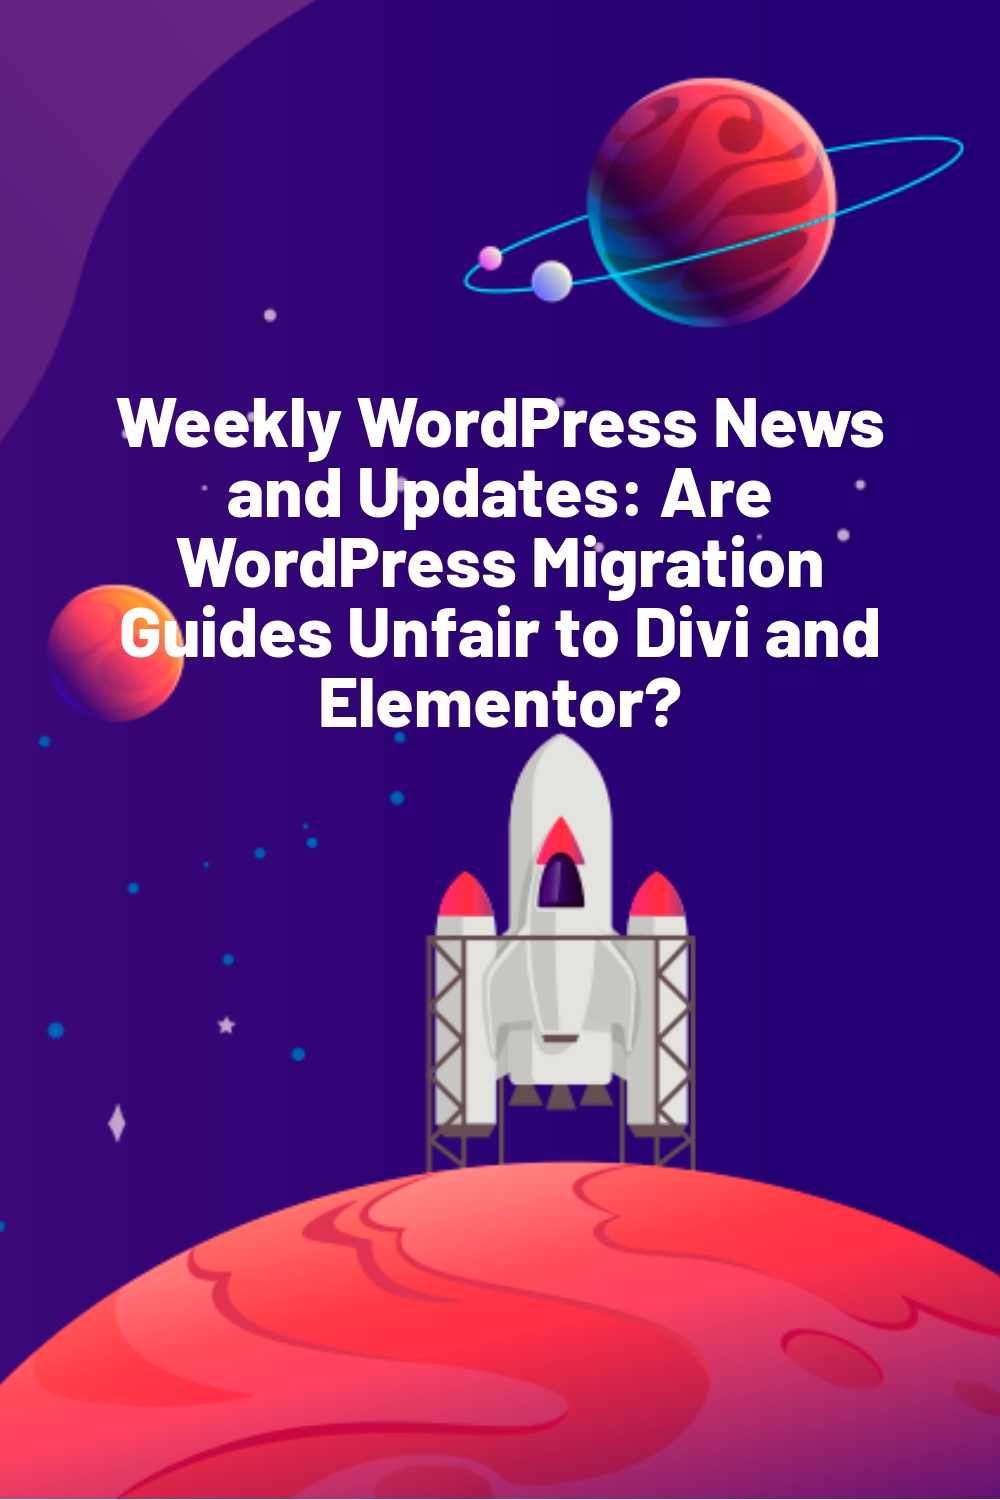 Weekly WordPress News and Updates: Are WordPress Migration Guides Unfair to Divi and Elementor?